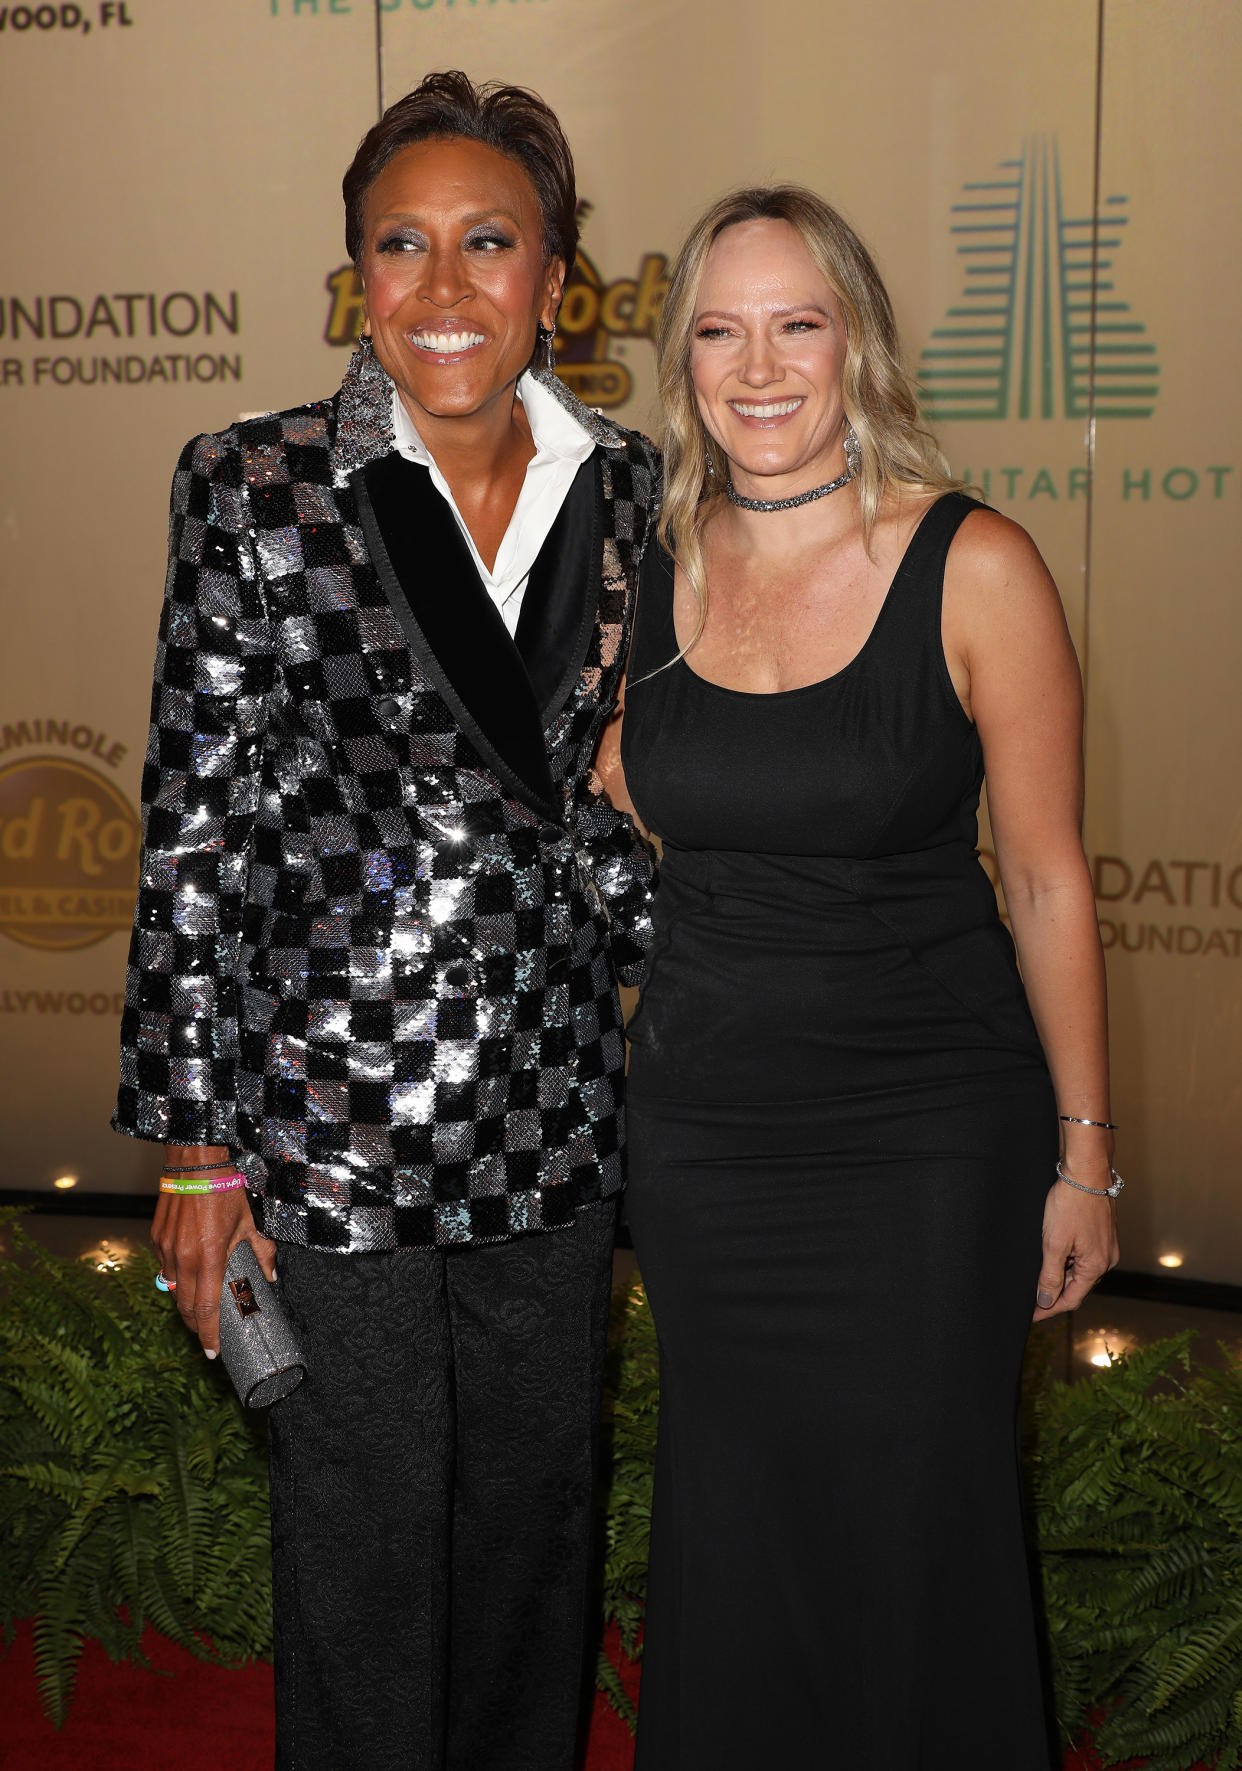 HOLLYWOOD, FL - NOVEMBER 16:  Robin Roberts and Amber Laign are seen arriving to the 2019 Shawn Carter Foundation Gala at Seminole Hard Rock Hotel and Casino on November 16, 2019 in Miami, Florida.  (Photo by Alexander Tamargo/Getty Images)